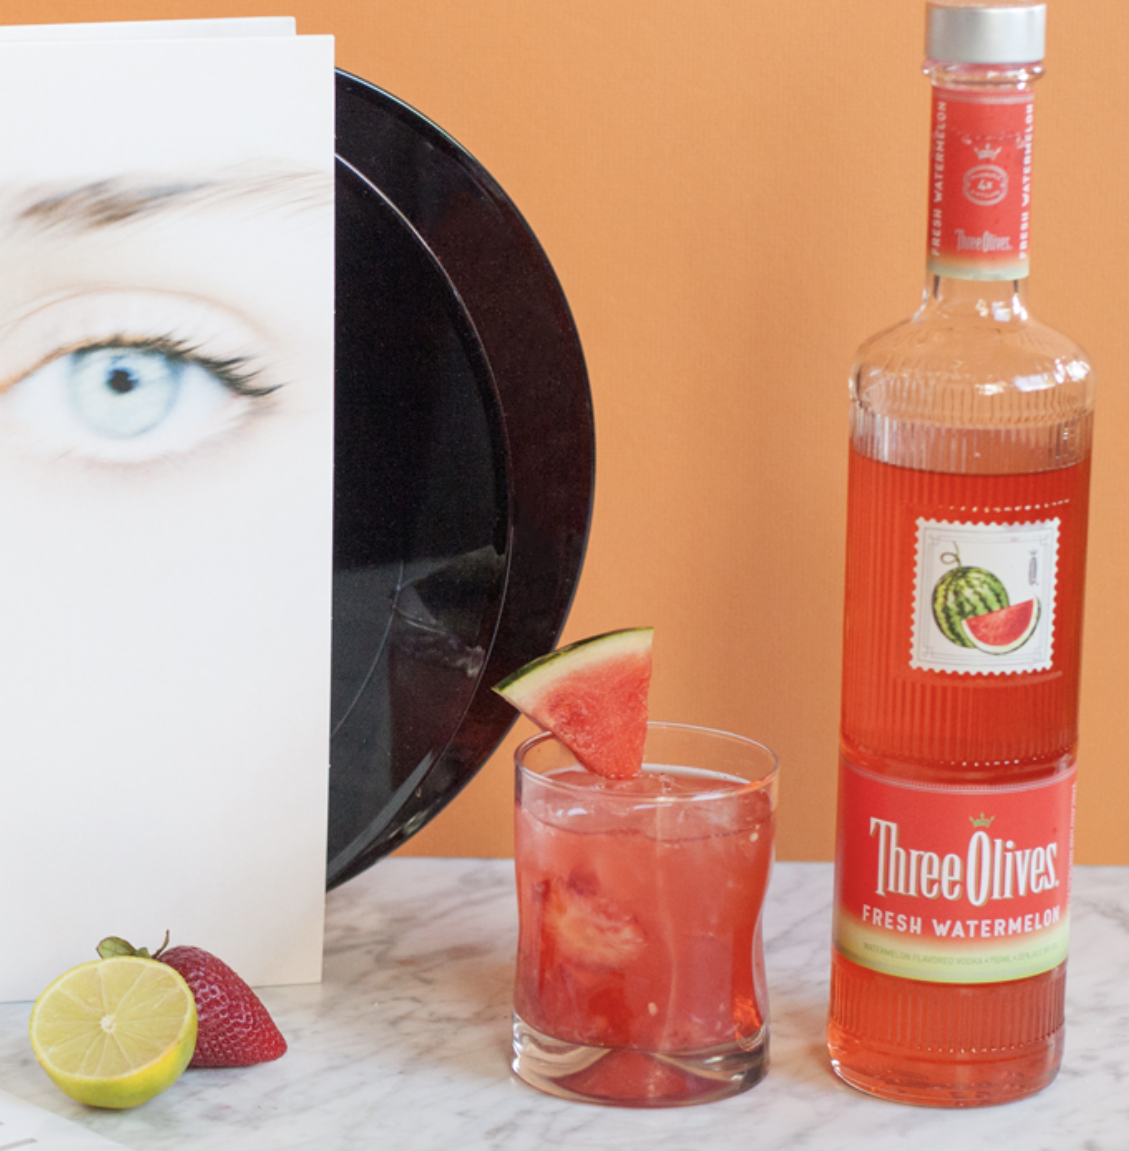 Learn To Make This Month's Cocktail Before Your Fiona Apple Album Arrives